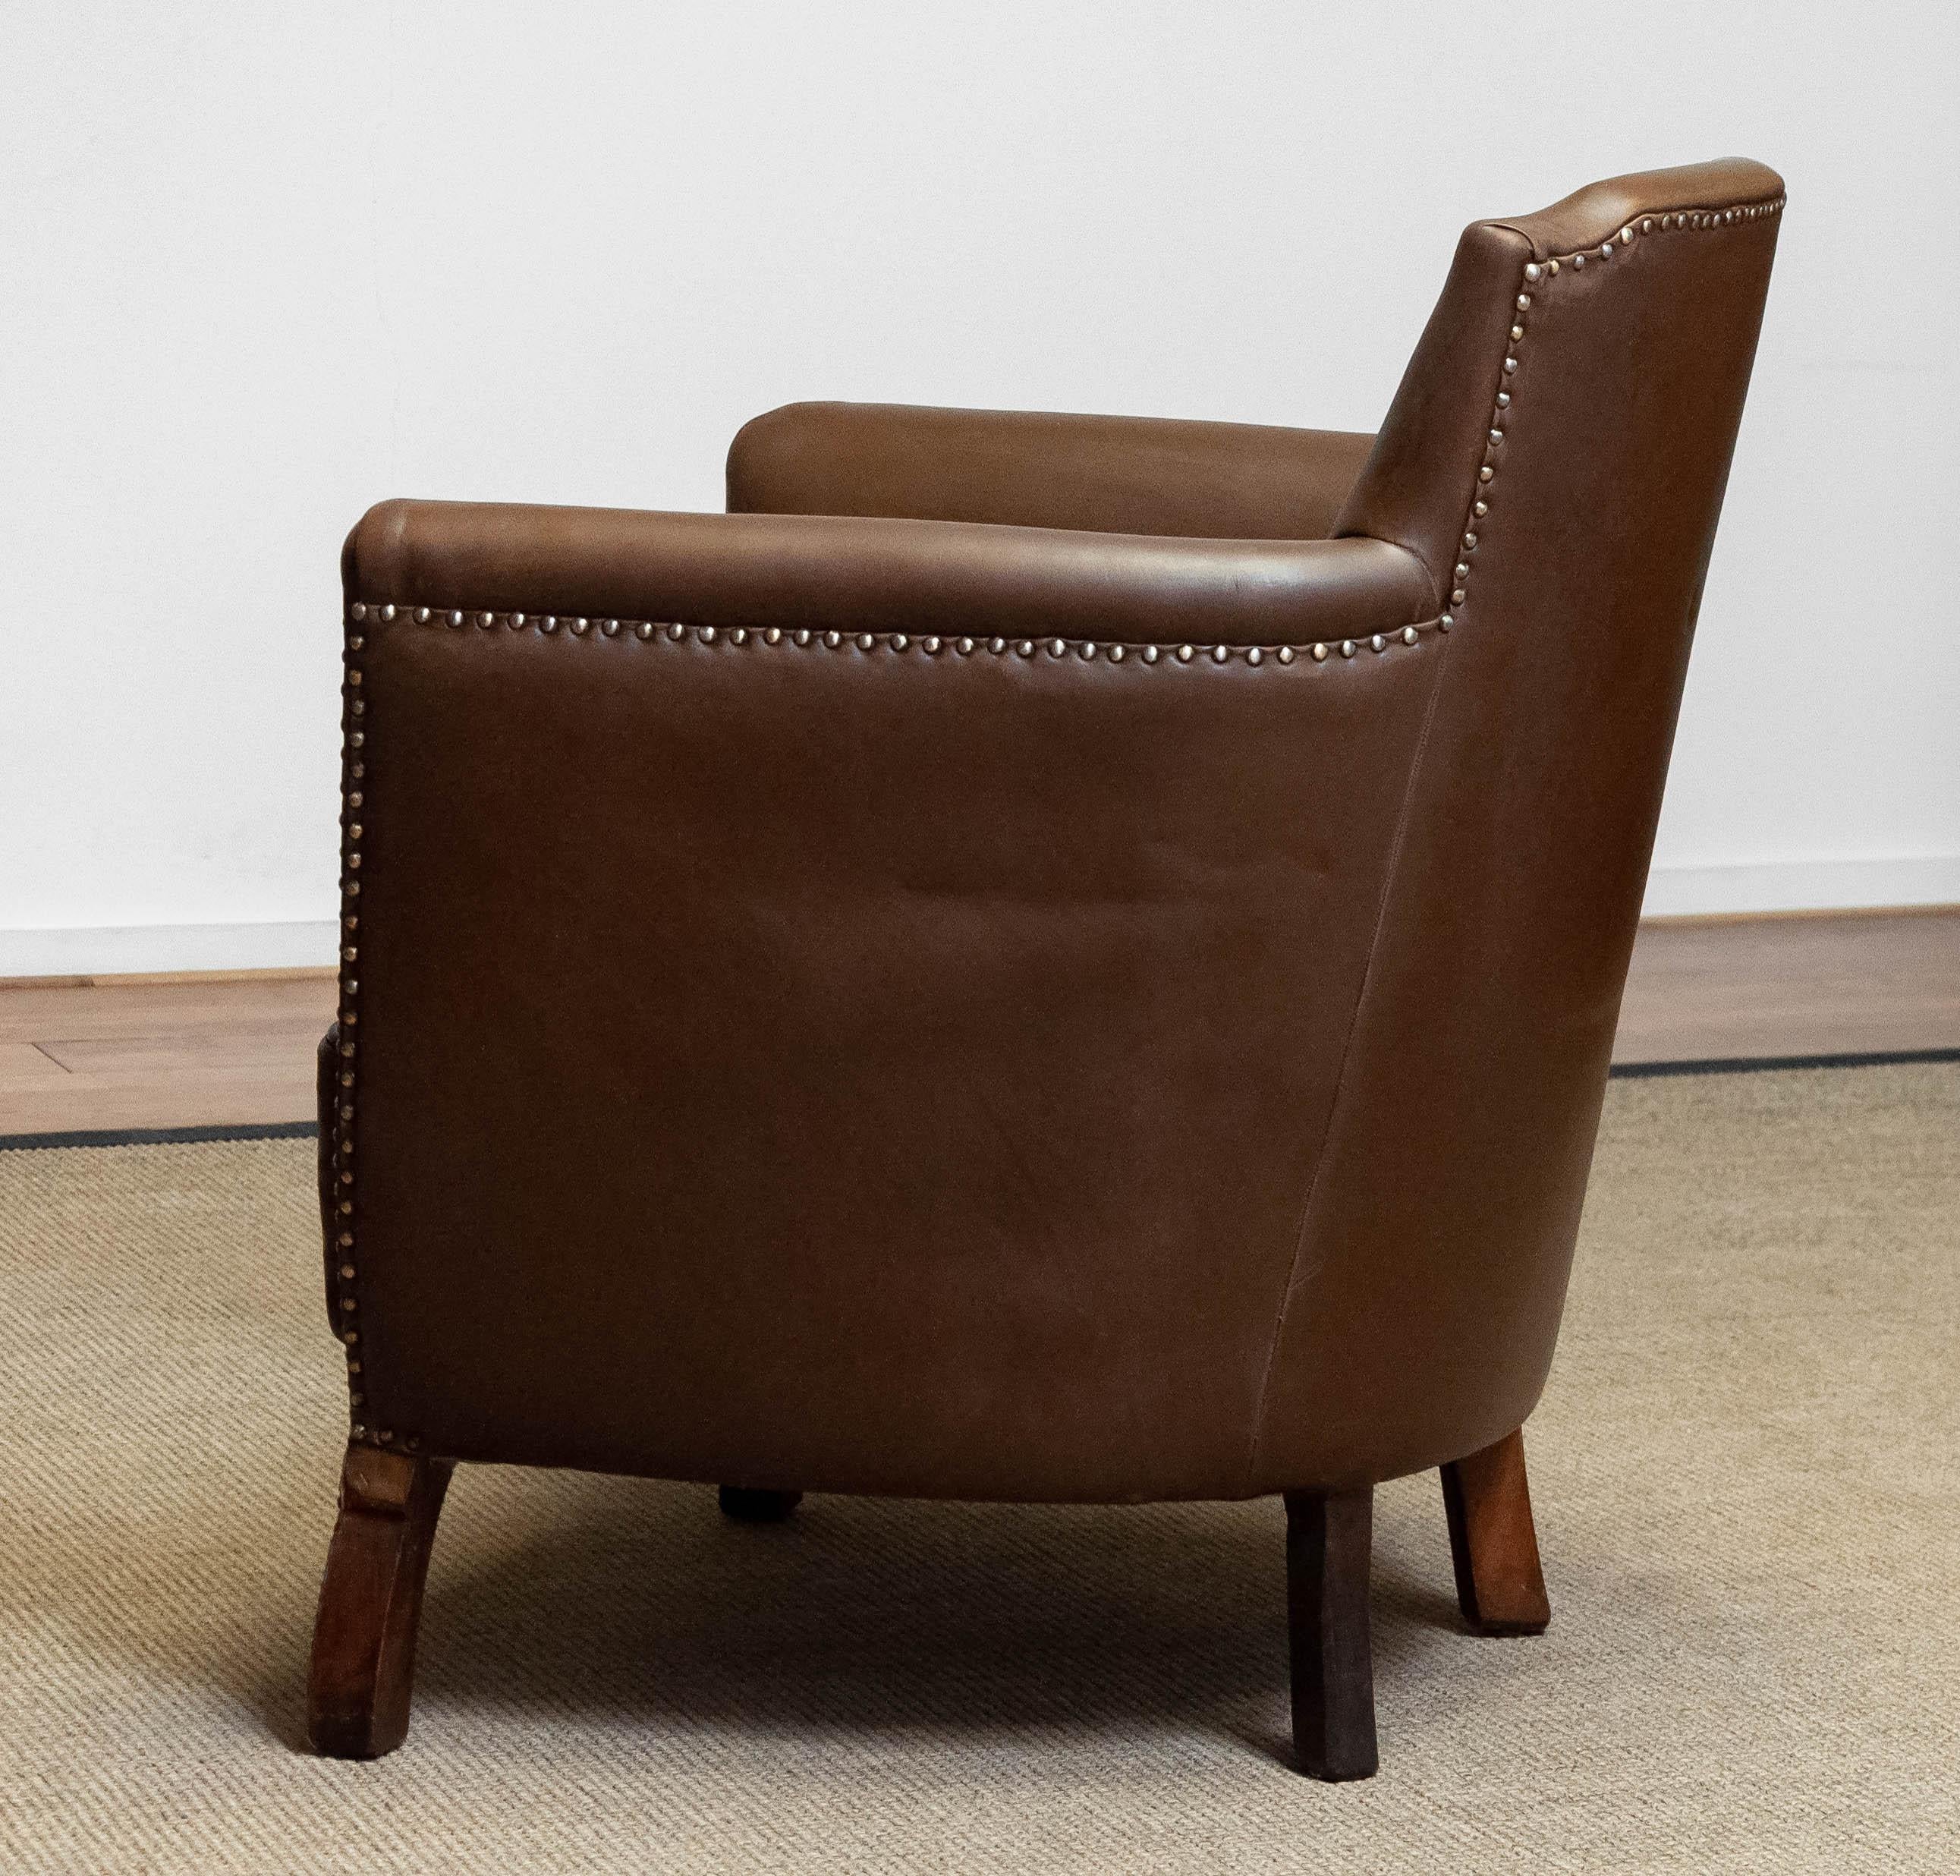 Mid-20th Century 1930s Swedish Tan / Brown Nailed Leather Lounge Chair By Otto Schultz For Boet For Sale